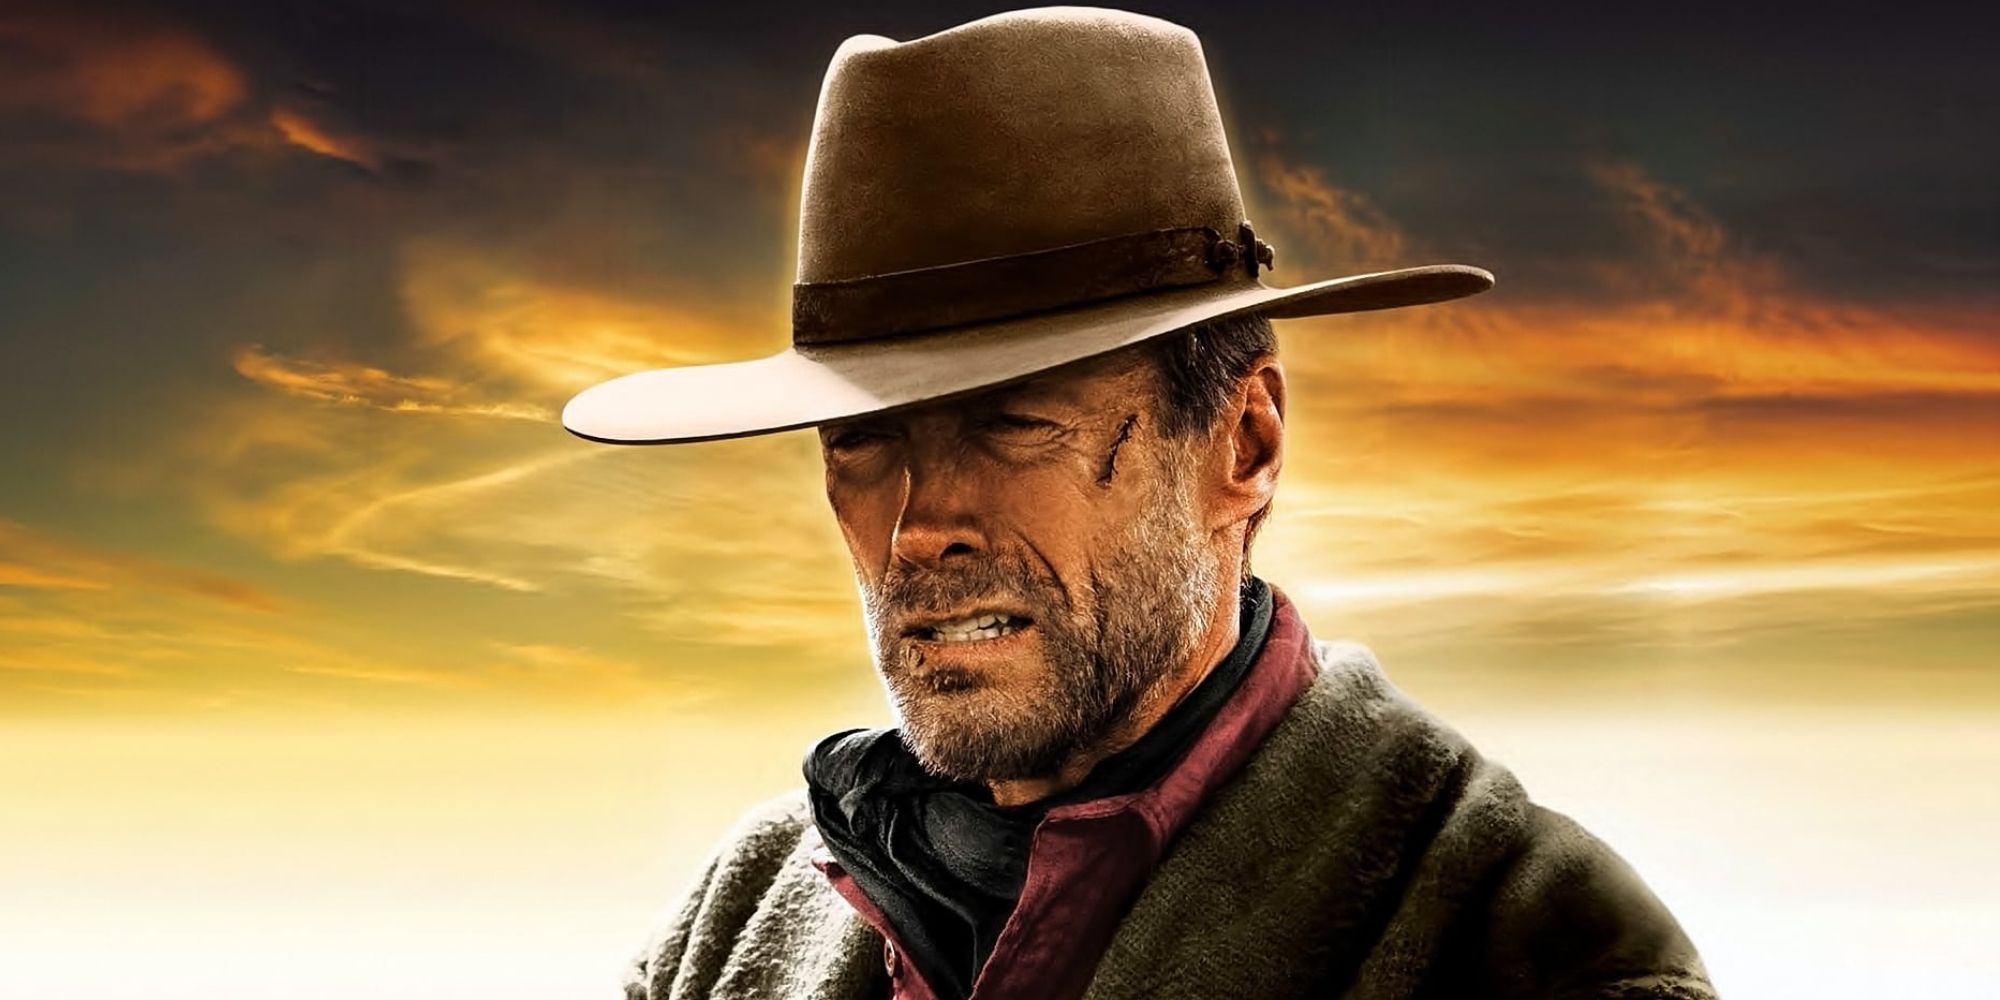 A close-up of Clint Eastwood wearing a cowboy hat, looking disgruntled in the 1992 Unforgiven poster